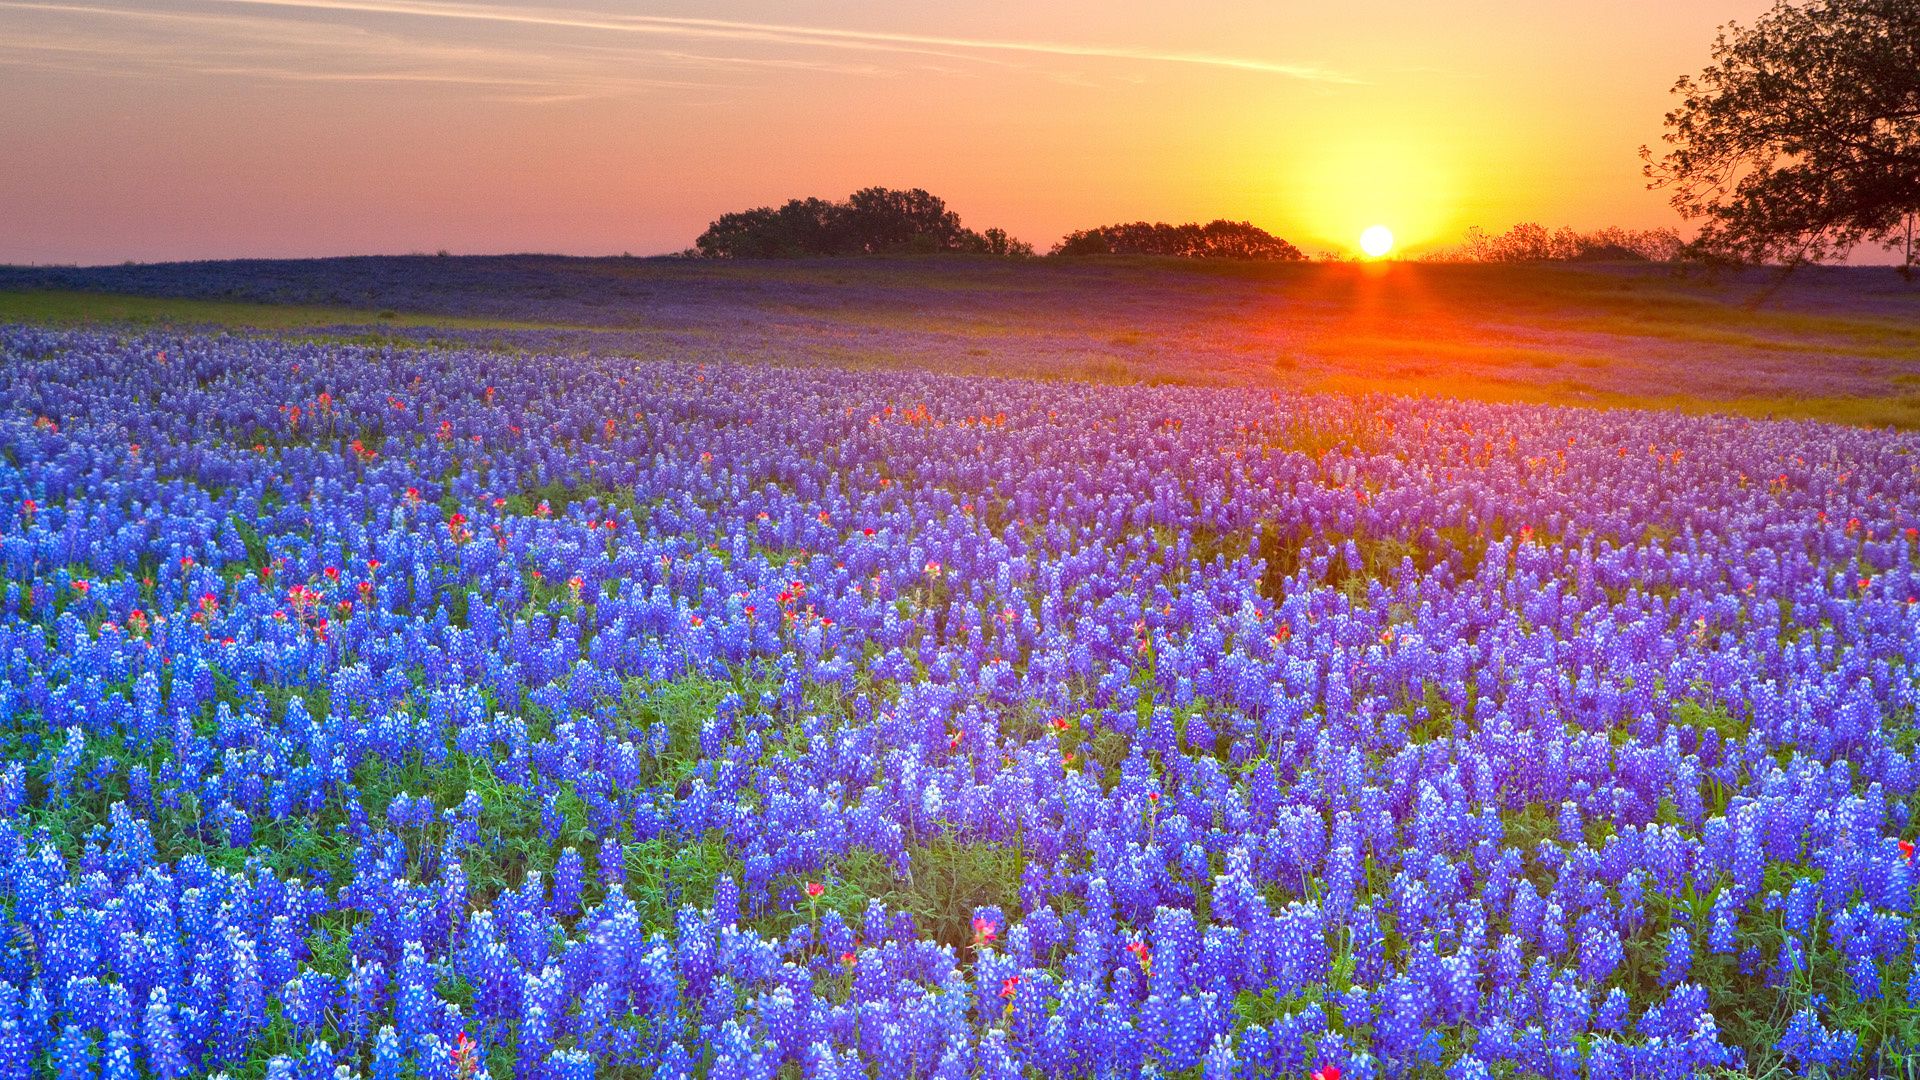 Bluebonnets and wildflowers at sunset in the Texas Hill Country - Texas